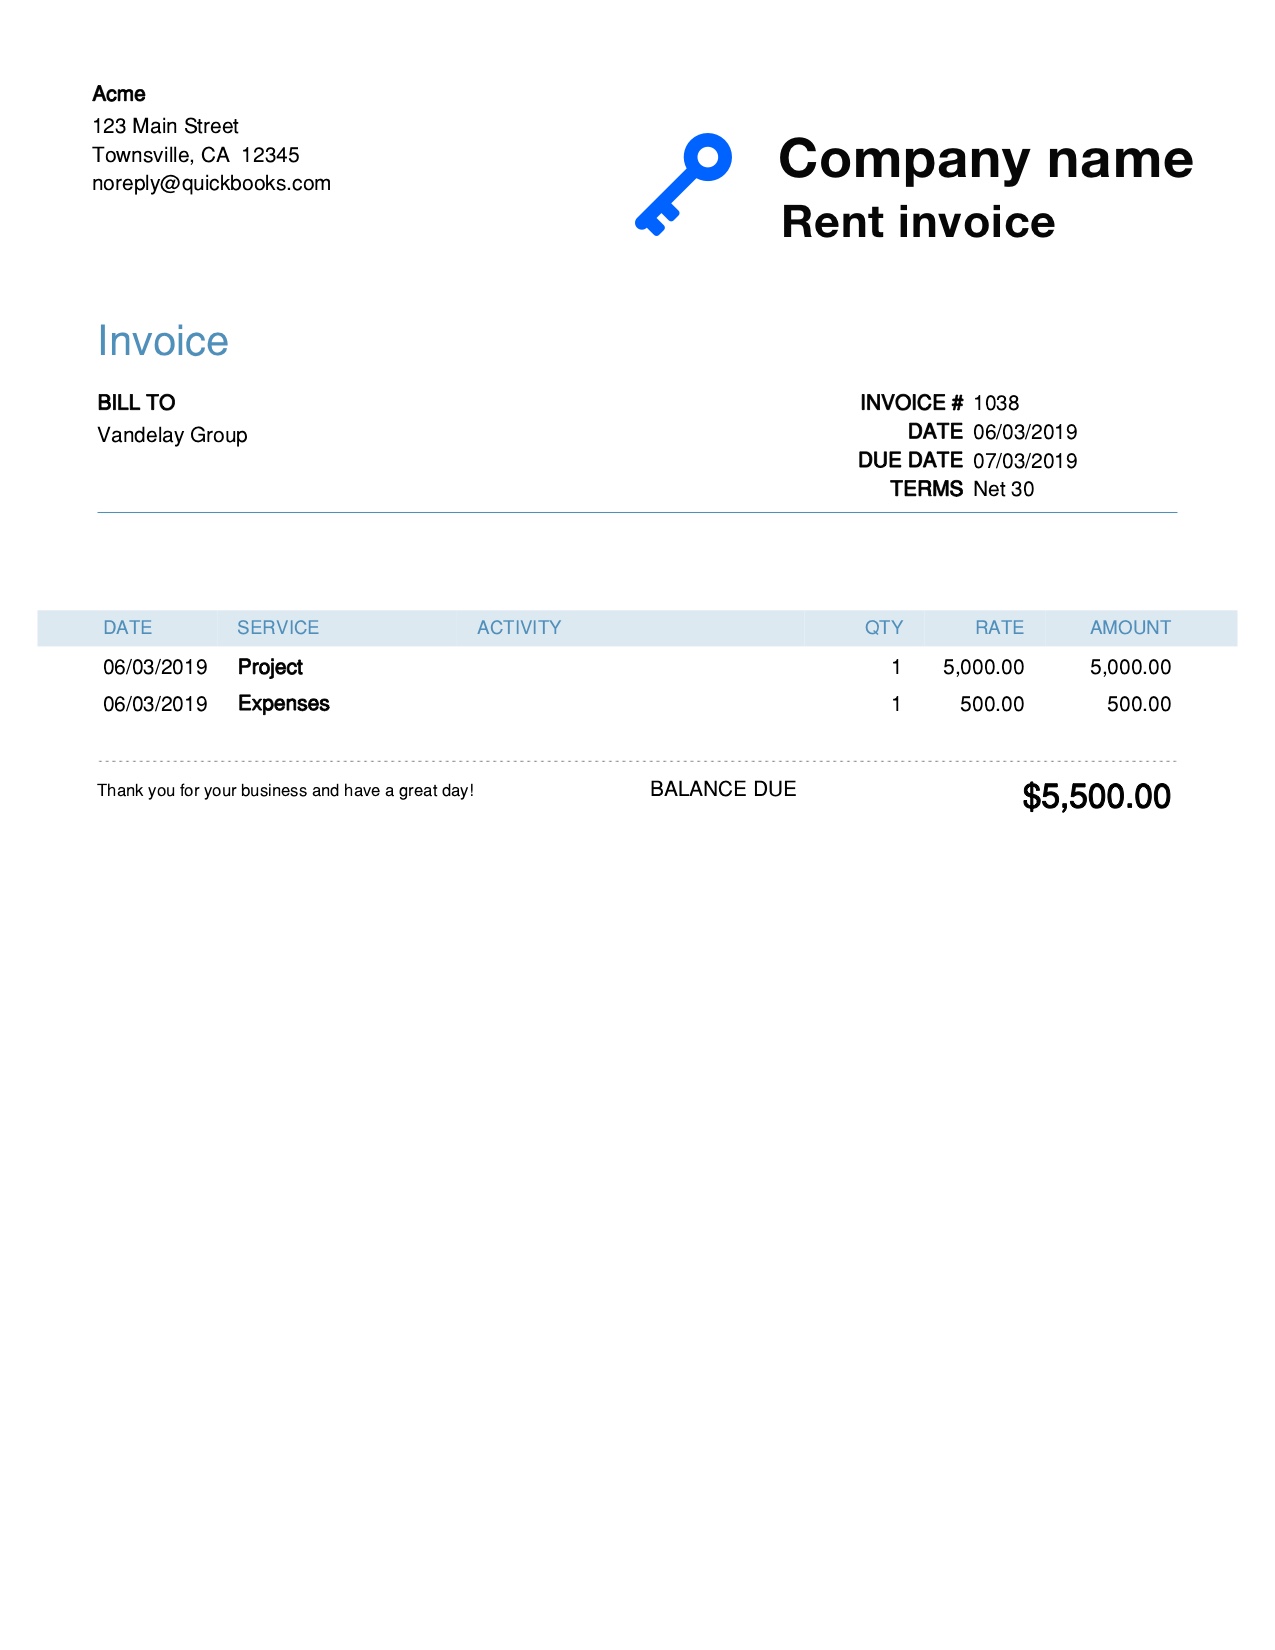 Free Rent Invoice Template. Customize and Send in 90 Seconds